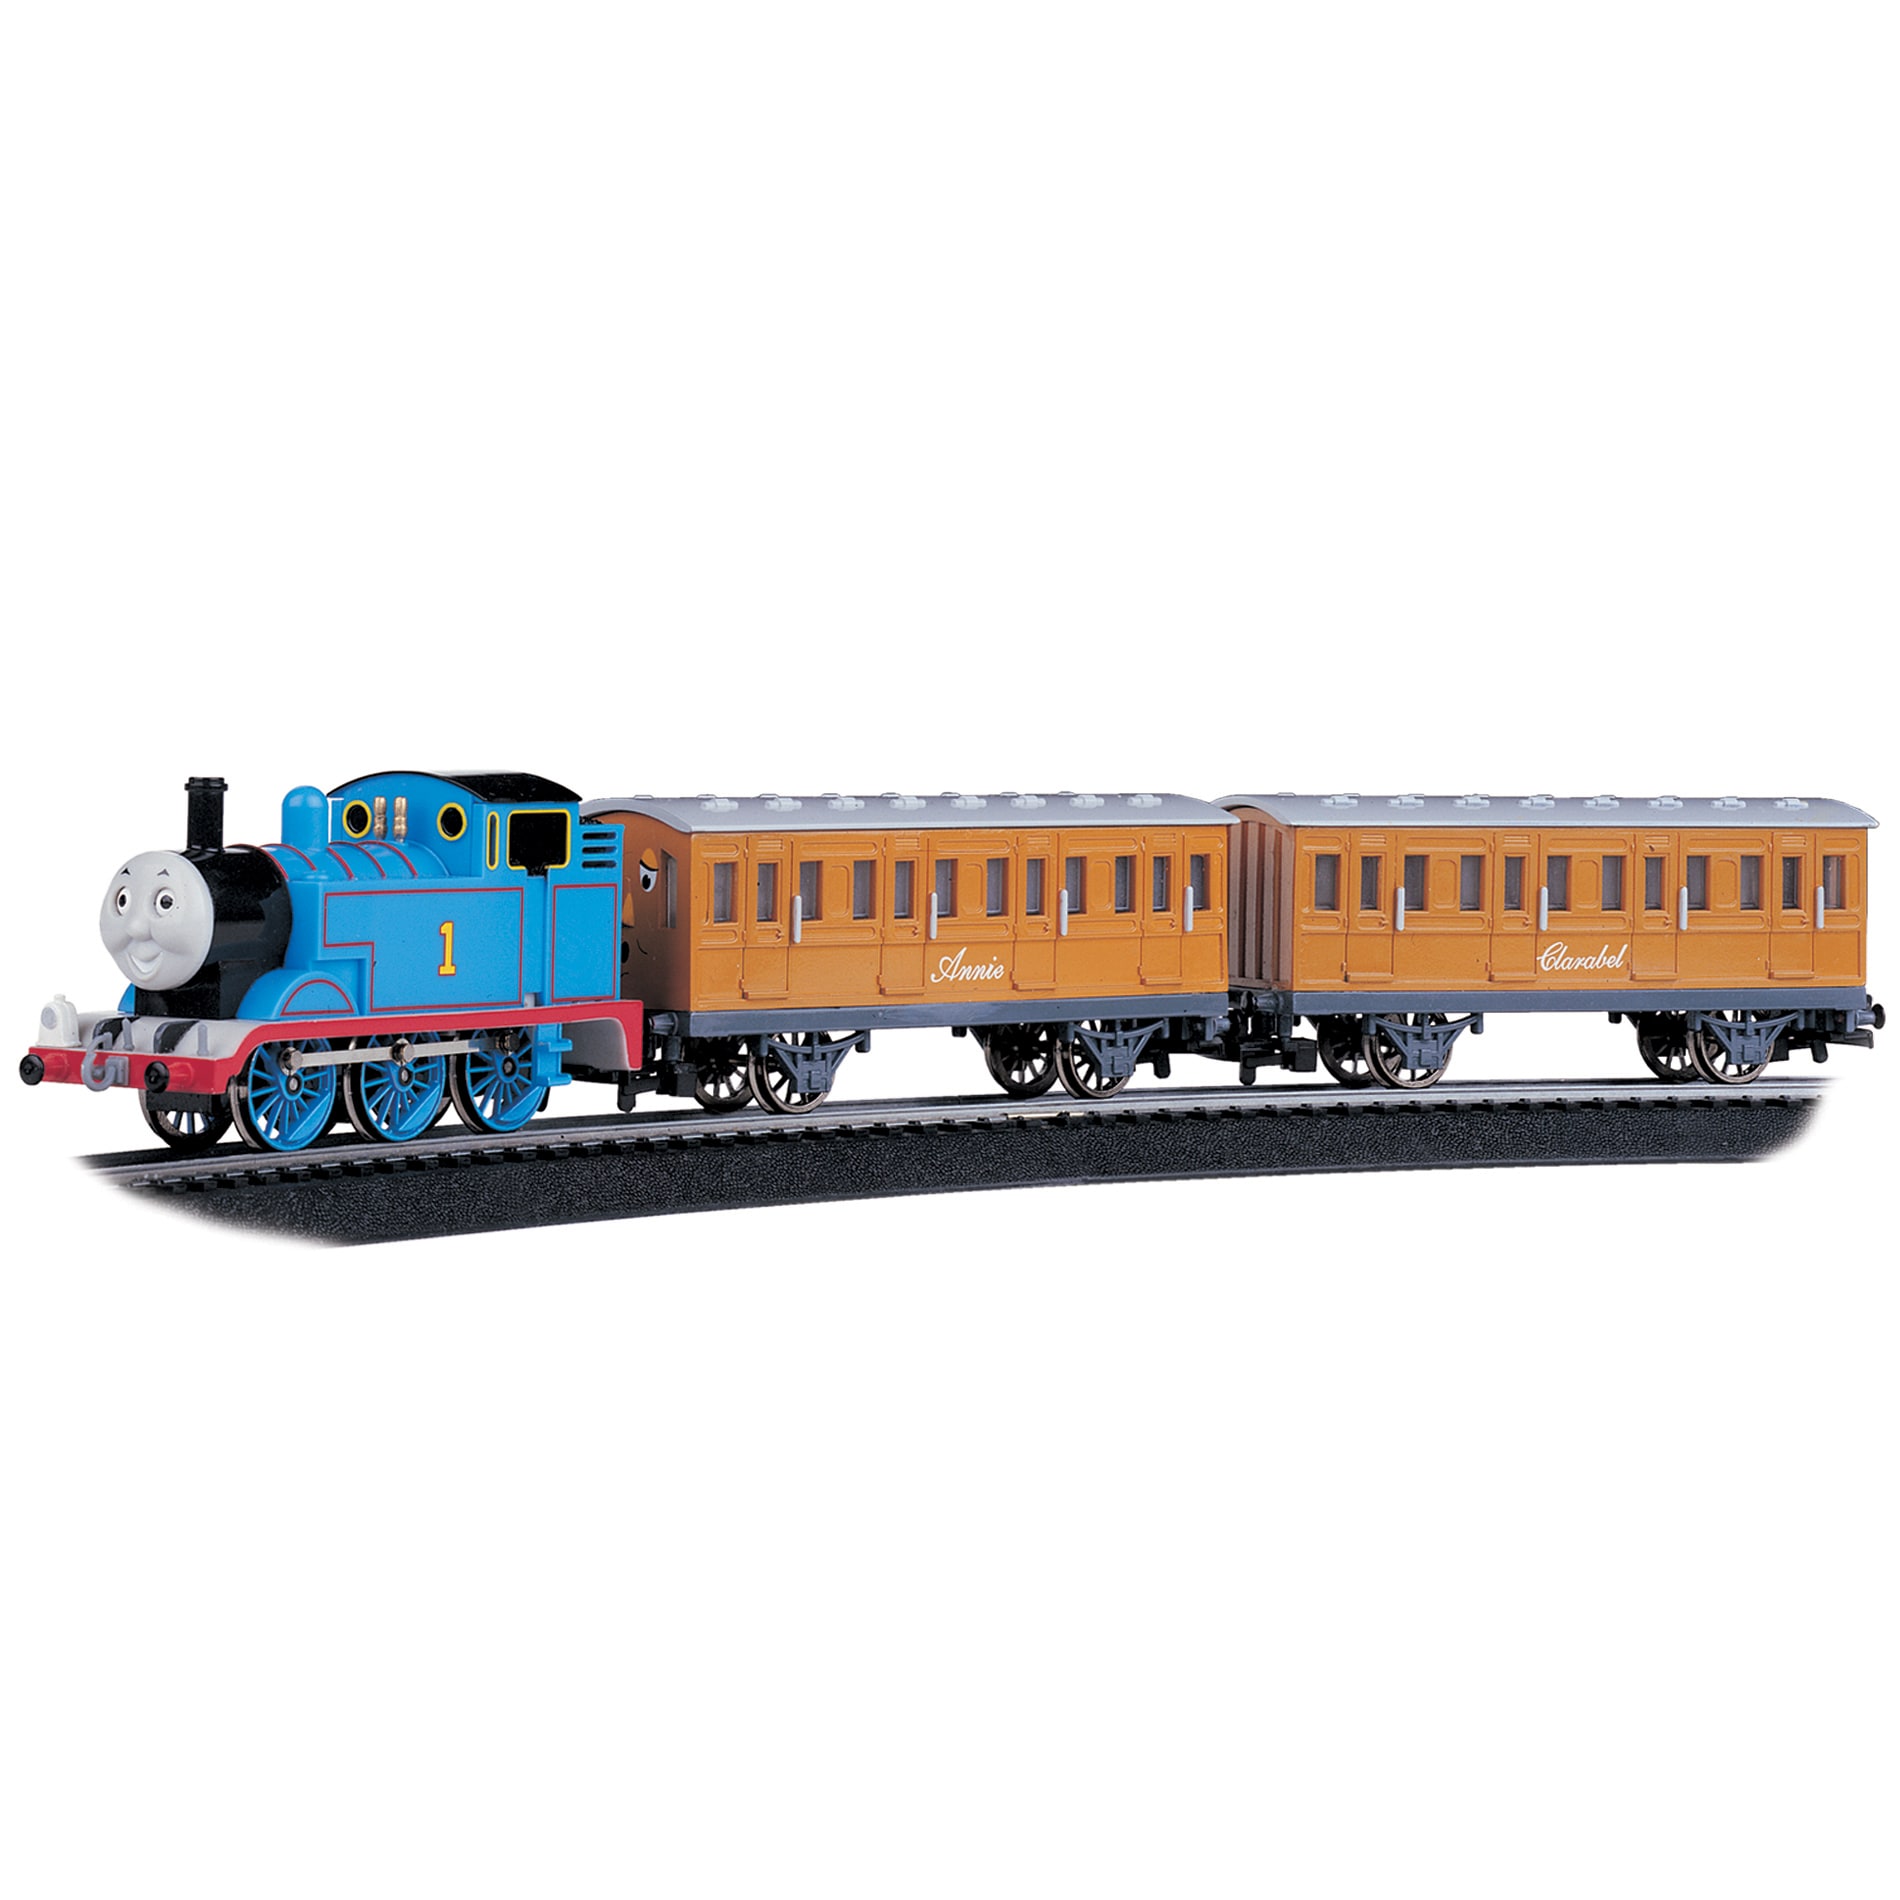 Bachmann HO Scale Thomas with Annie and Clarabel Train Set - 13922802 